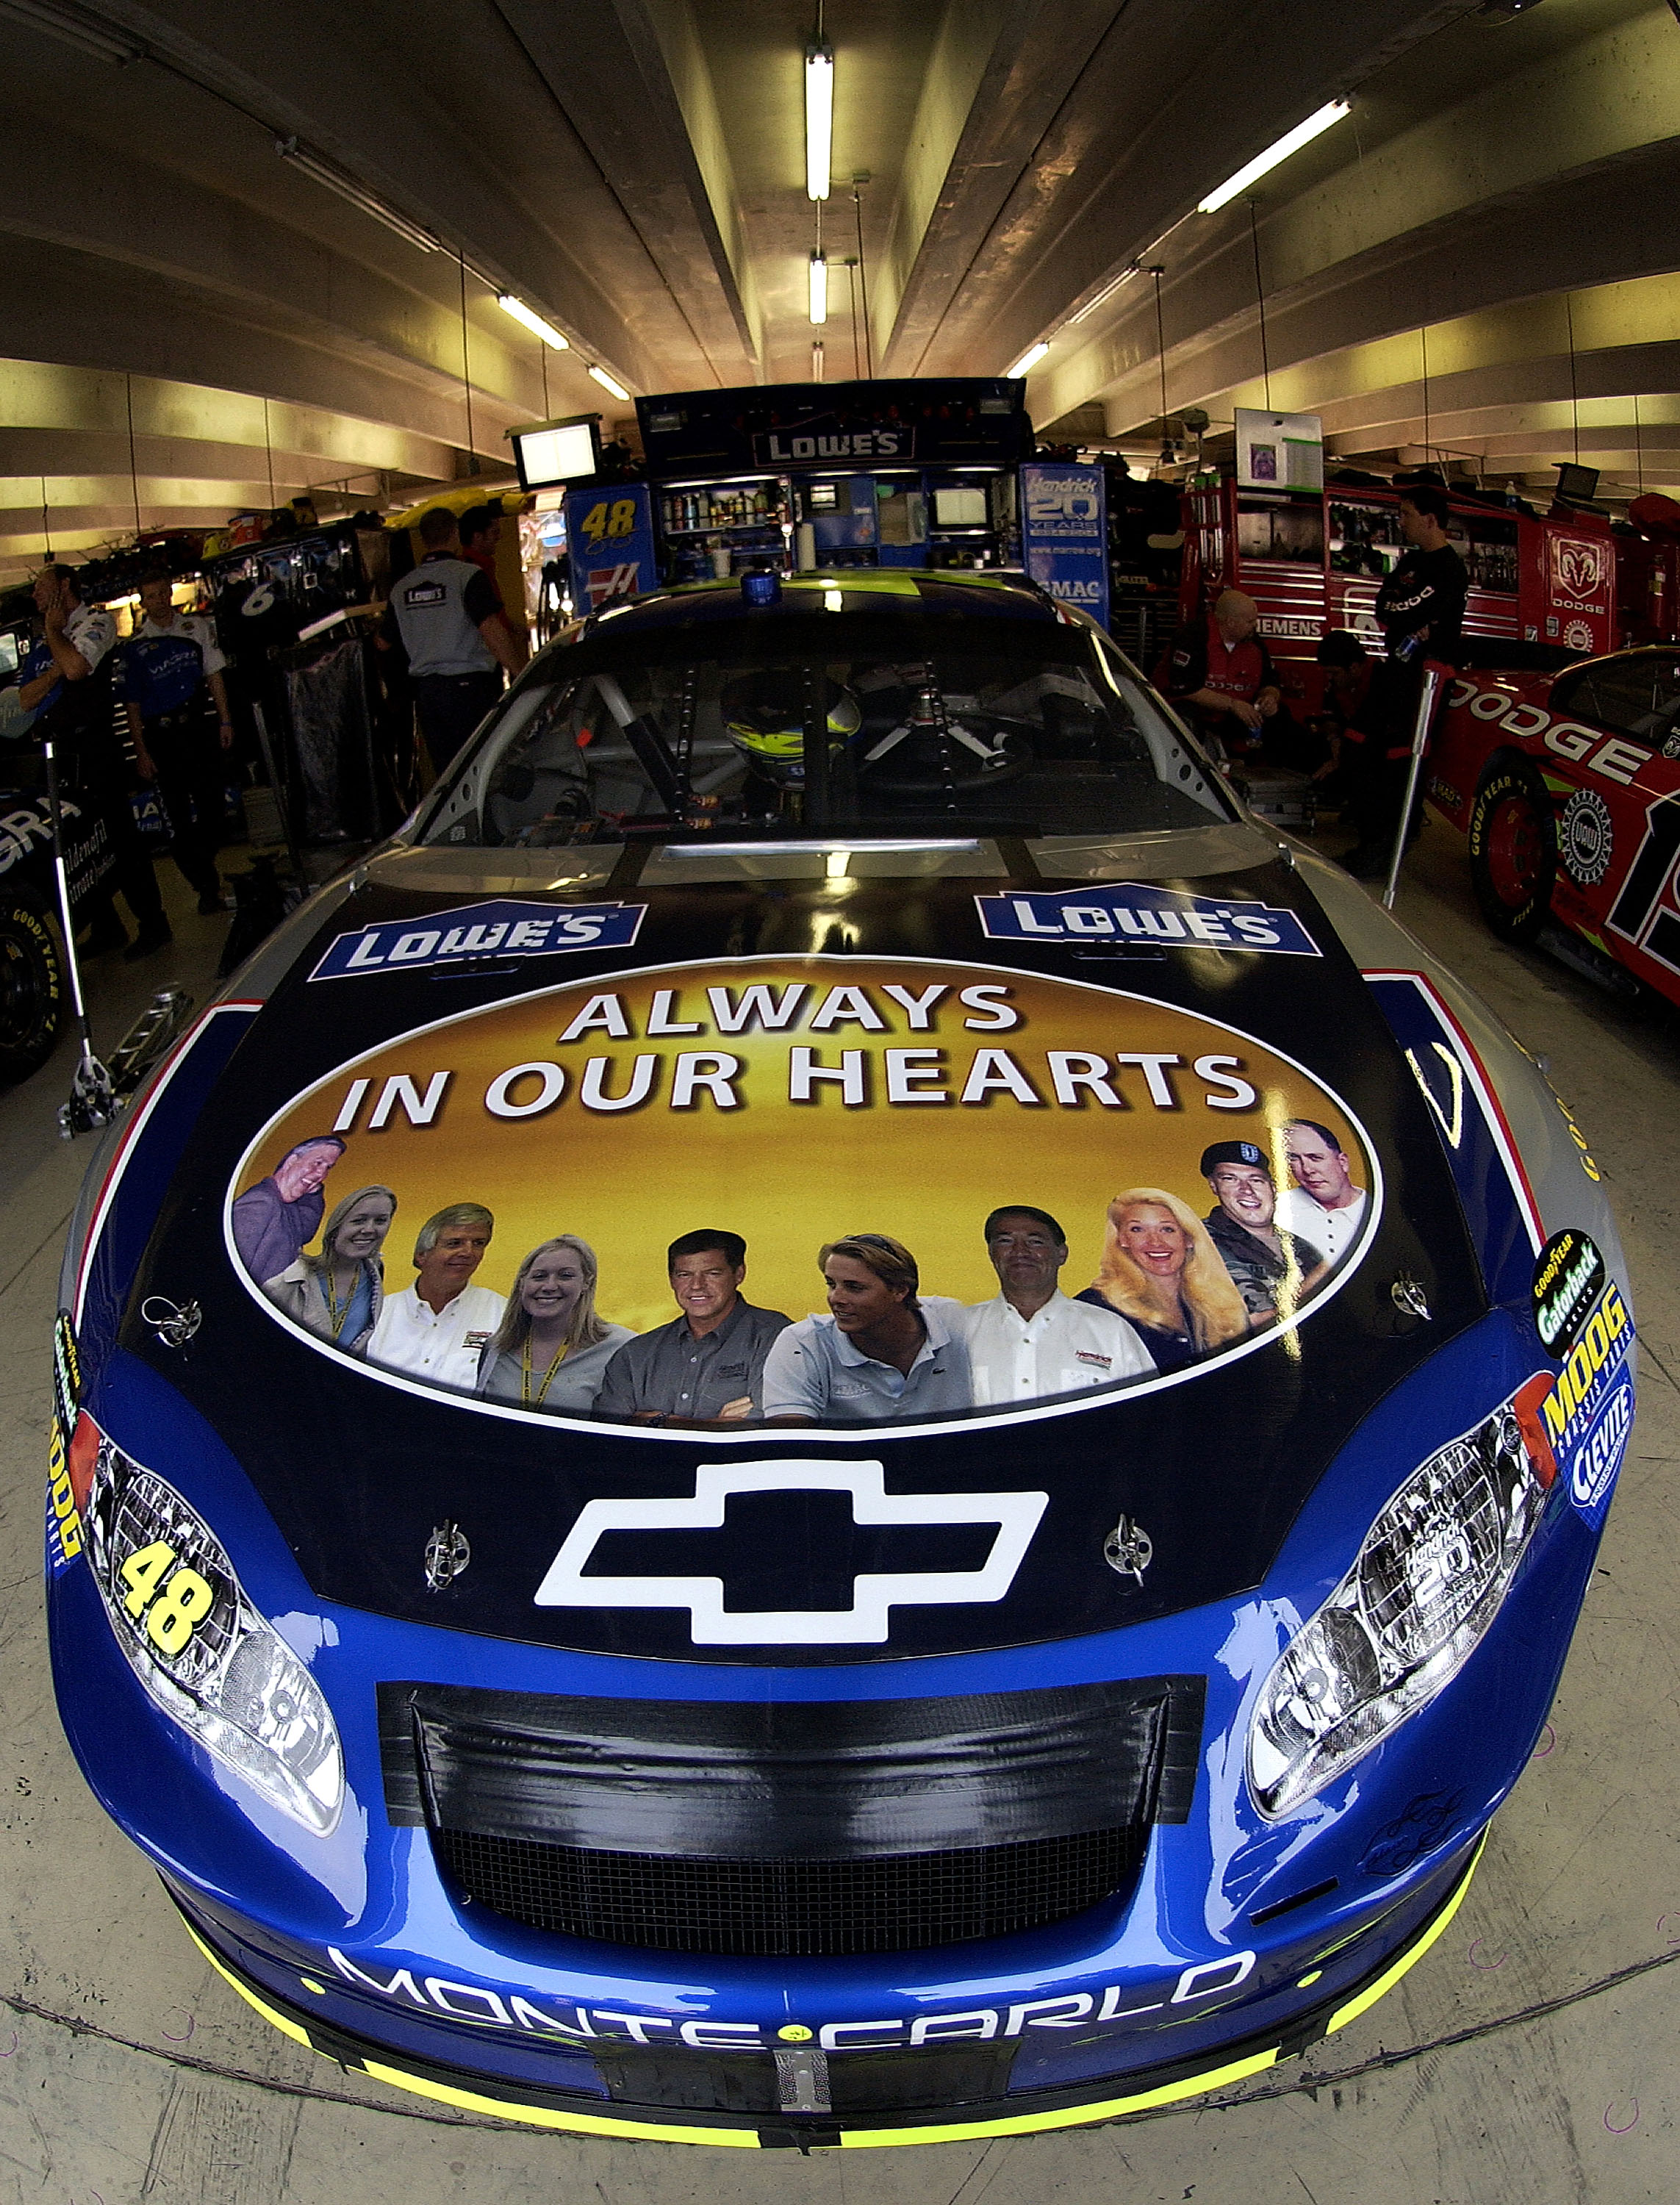 HAMPTON, GA - OCTOBER 30:  The tribute carried on the hood of the Hendrick Motorsports Lowes Chevrolet driven by Jimmie Johnson, during practice for the NASCAR Nextel Cup Series Bass Pro Shops MBNA 500 on October 30, 2004 at the Atlanta Motor Speedway in